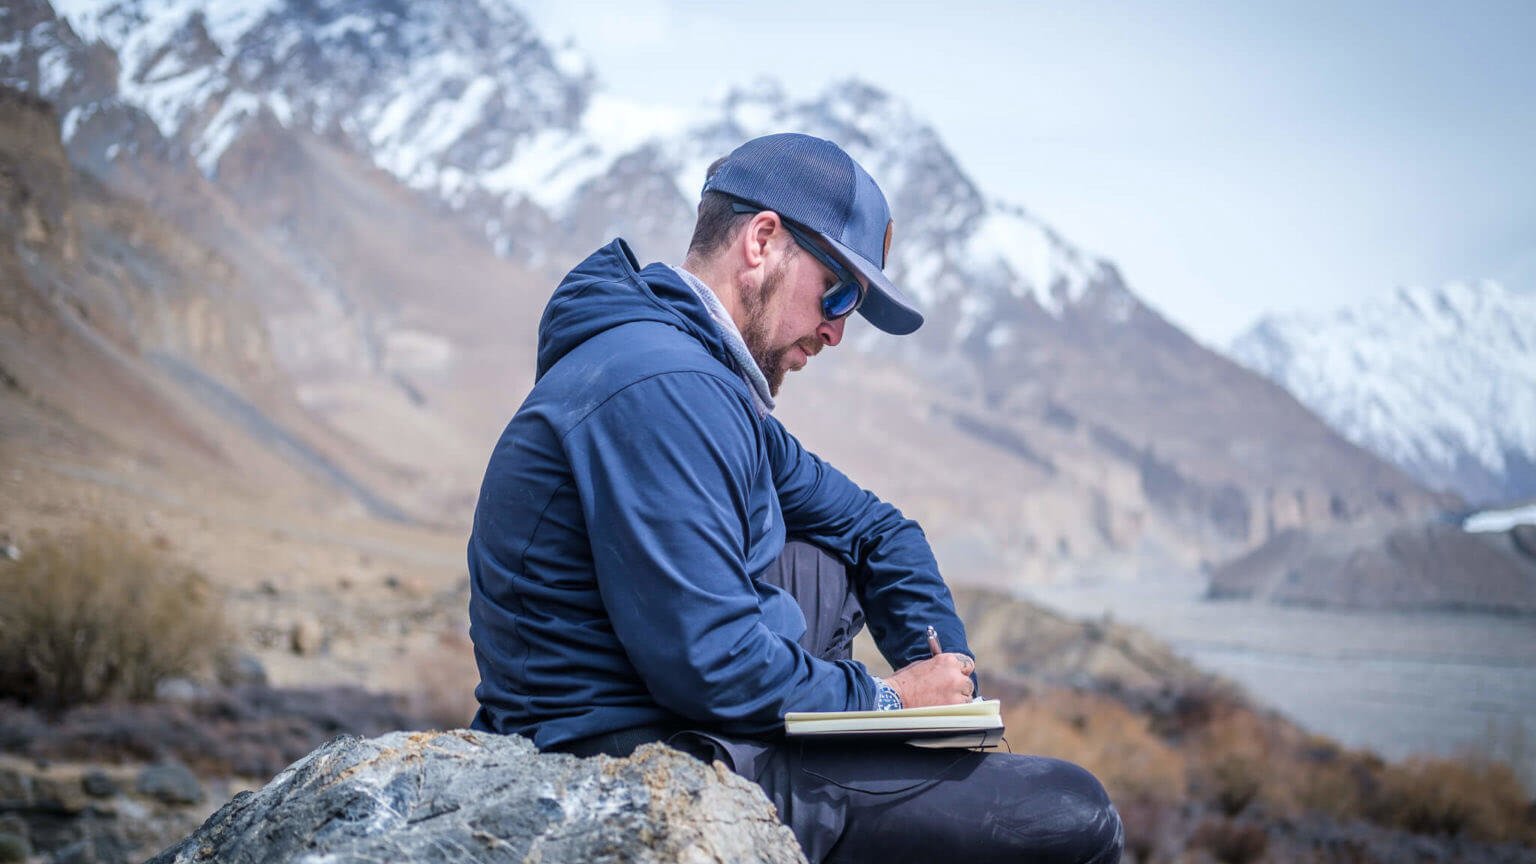 man journaling while sitting on a rocks in the mountains of pakistan